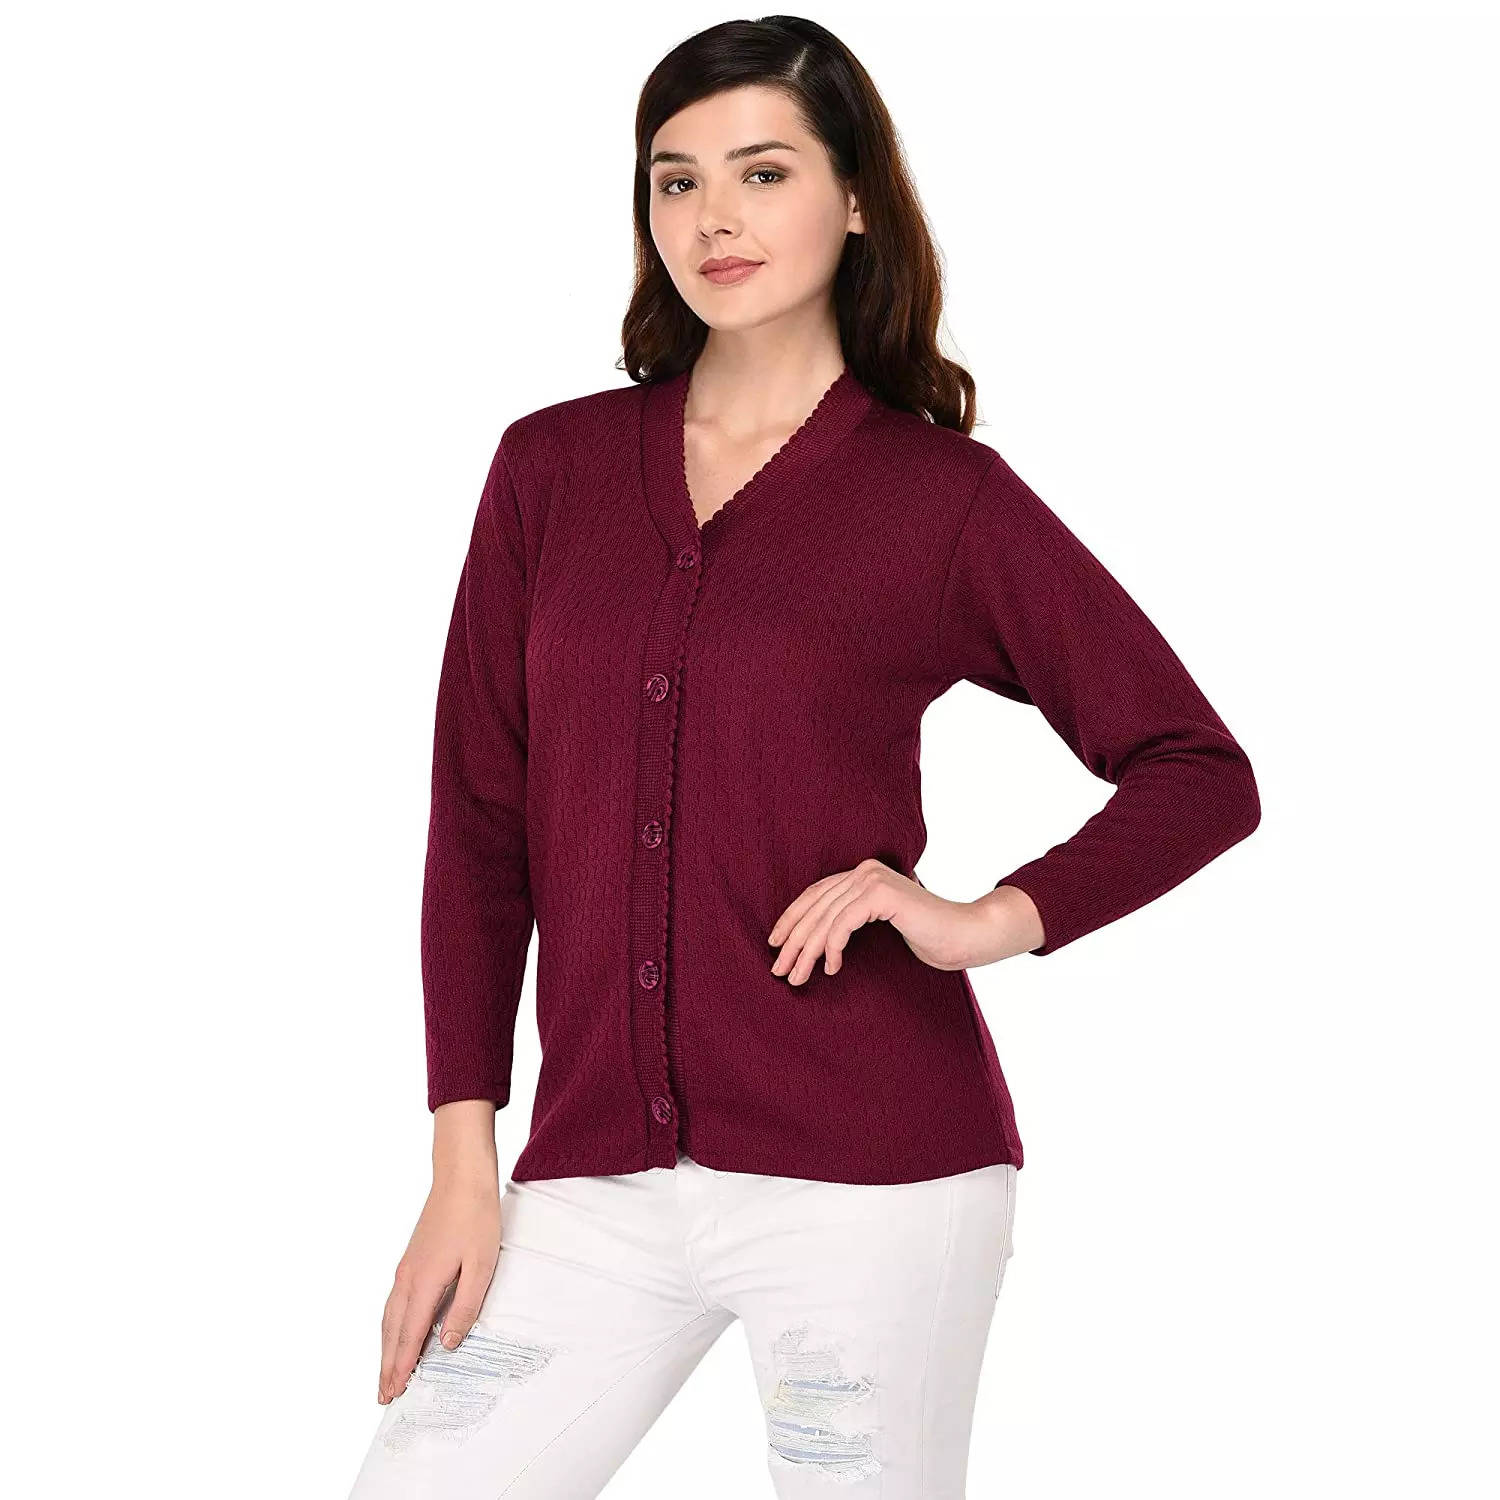 Cardigans for women: Get The Best Deals On Cozy Warm Cardigans For Women In  India - The Economic Times